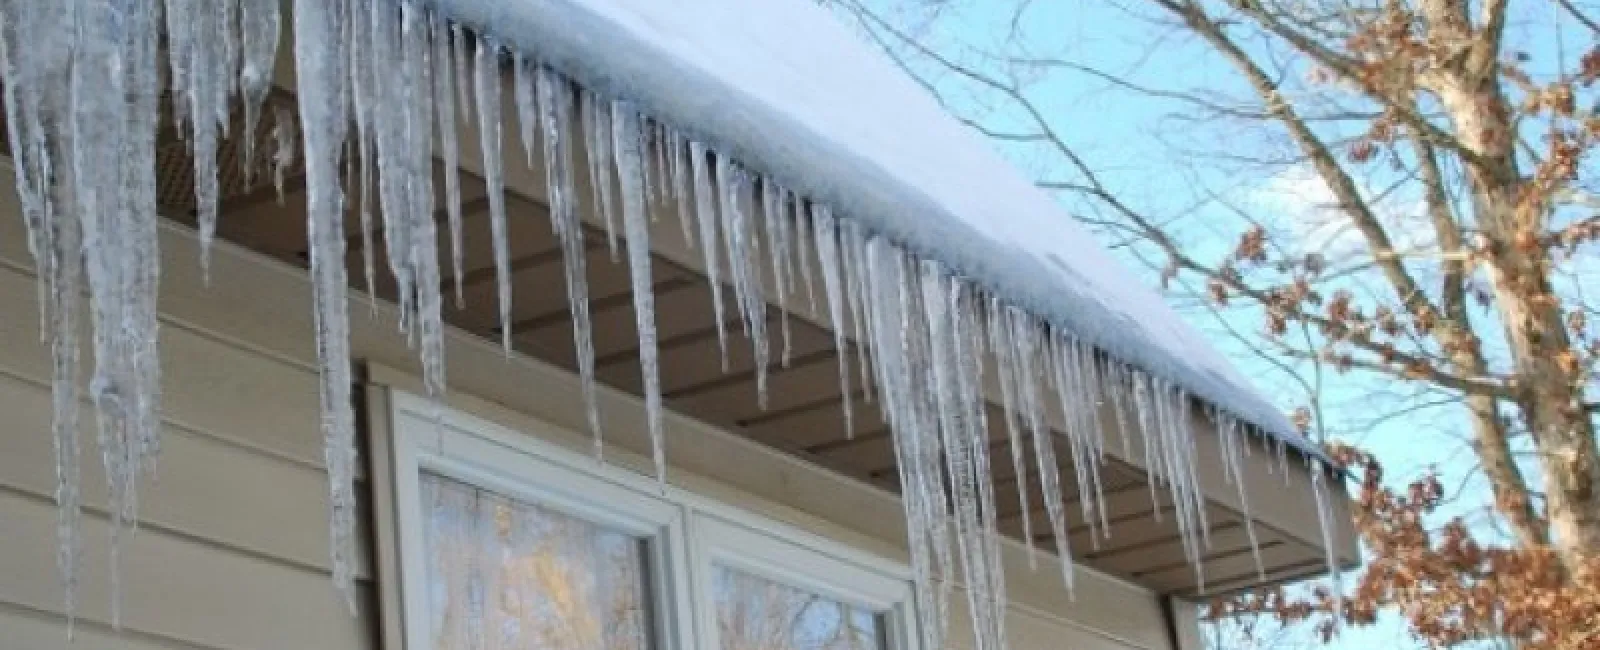 Battling the Effects of Melting Ice On Your Roof